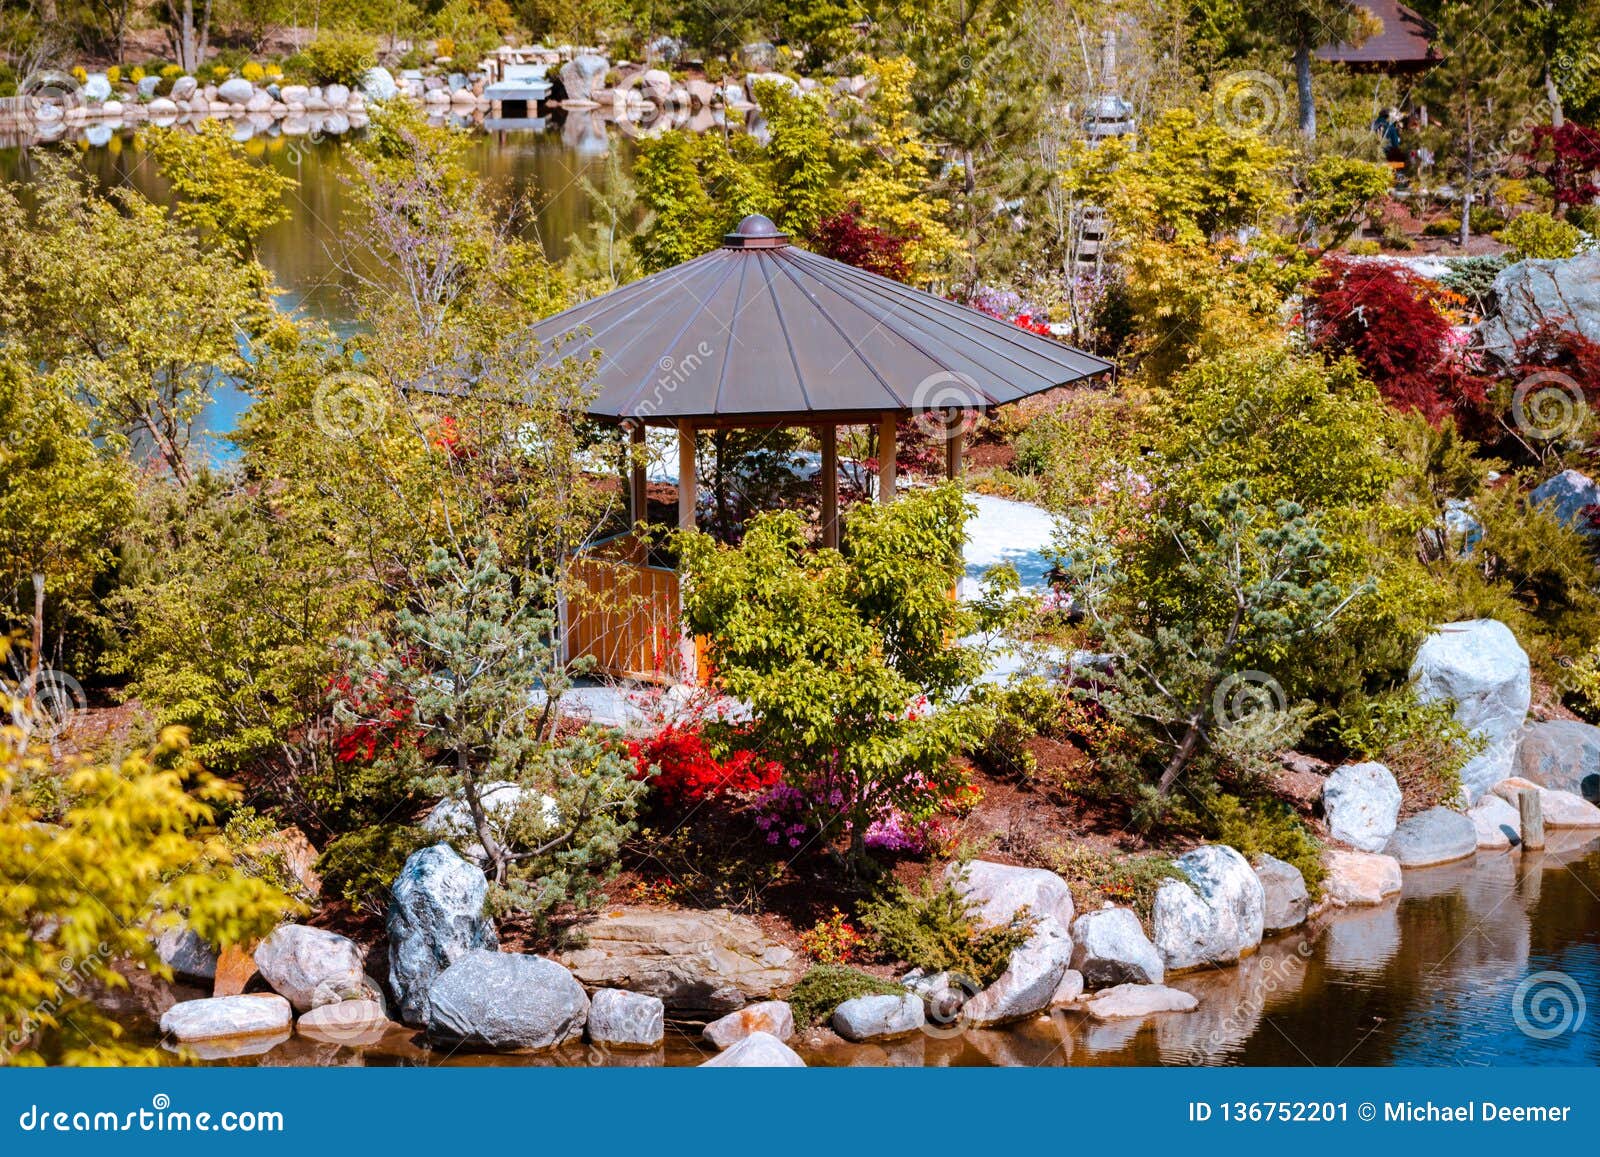 Quiet Gazebo Set In The Middle Of A Blooming Japanese Garden At